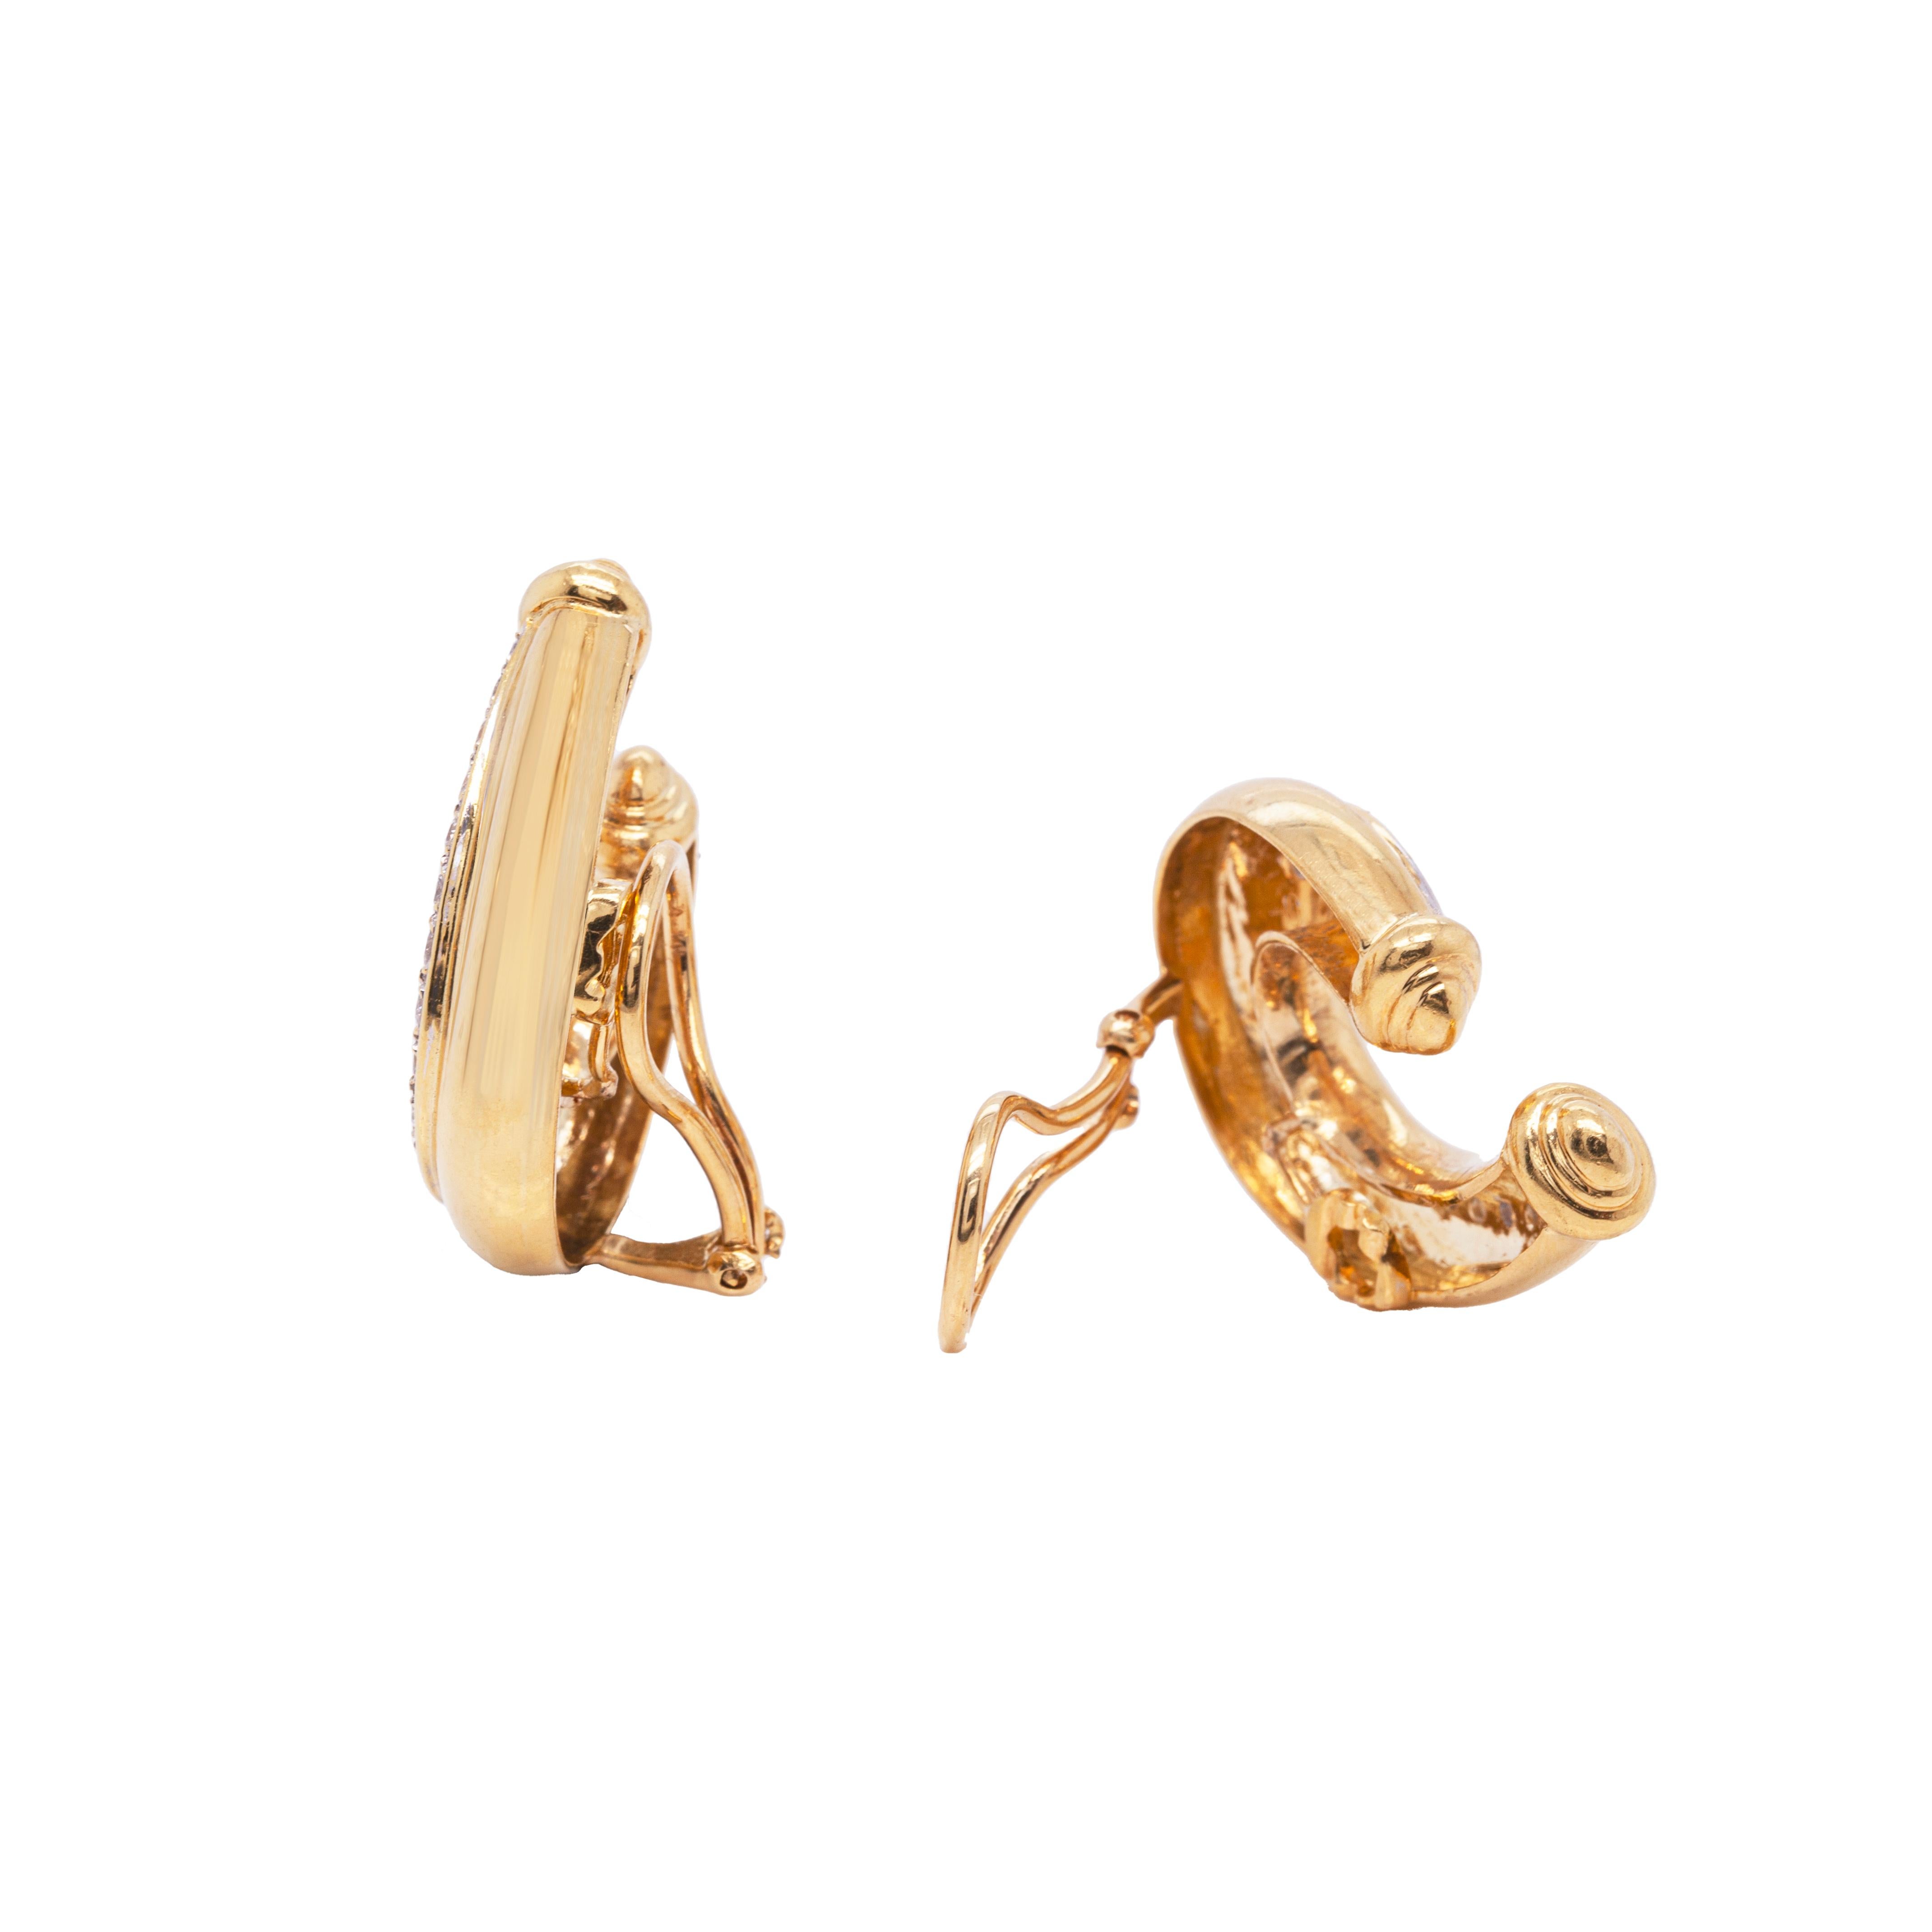 These striking 1980's earrings are set with a total of approximately 0.90 carat of fine quality round brilliant cut diamonds across the pair. The asymmetric design, masterfully crafted from solid 18 carat yellow gold, makes them a fabulous choice